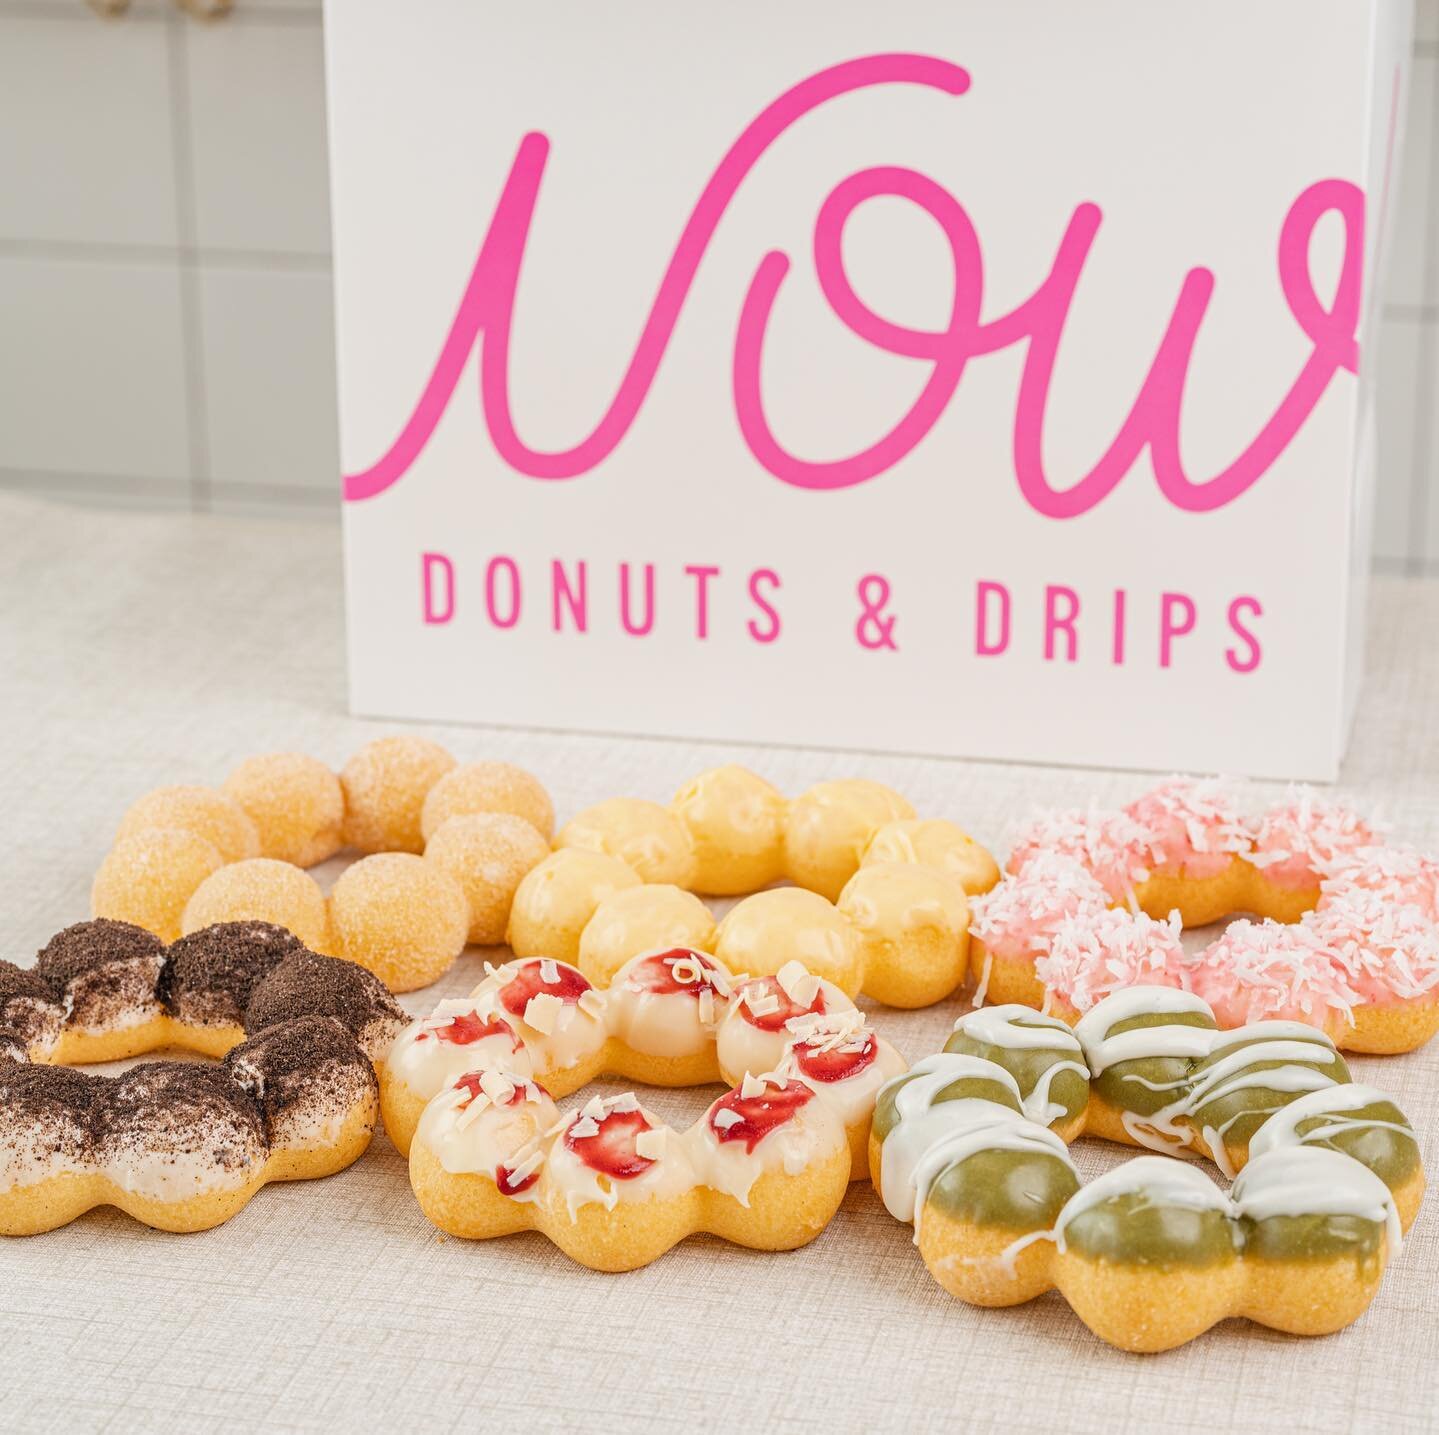 We never miss an opportunity for mochi donuts! One of each please! 🙋

From L to R: Cinnamon Sugar, Mango, Strawberry Coconut, Oreo, Pink Blossom (Raspberry with White Chocolate), Matcha with Cream Cheese

What flavor would you like to see next?